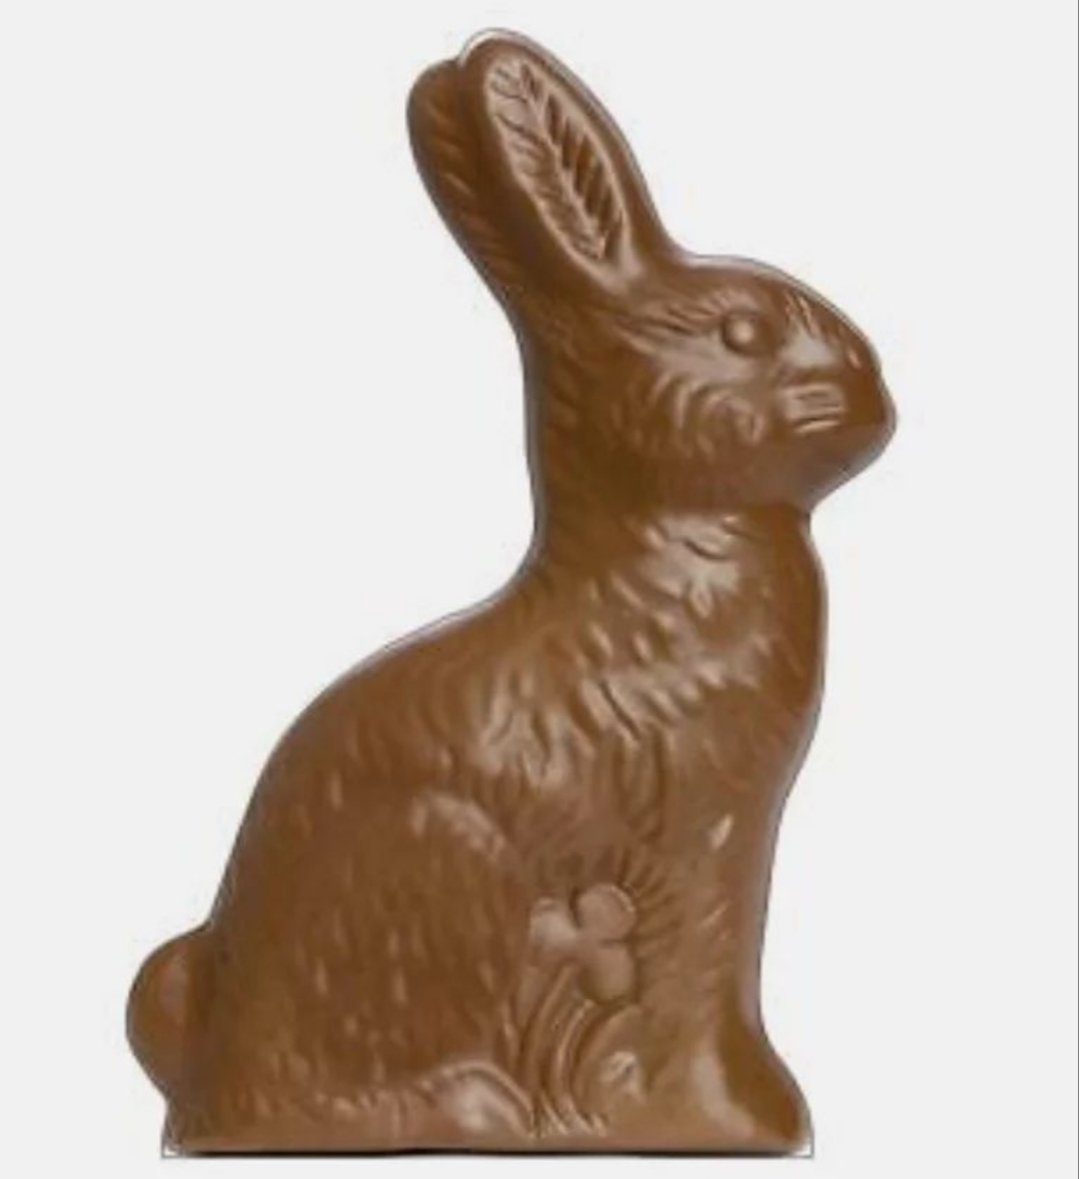 Fun Fact Friday (Easter Edition): Ninety million chocolate Easter bunnies are produced each year! 🐰 #RocketFizz #funfacts #eastercandy #easterbasket #chocolate #easterbunny